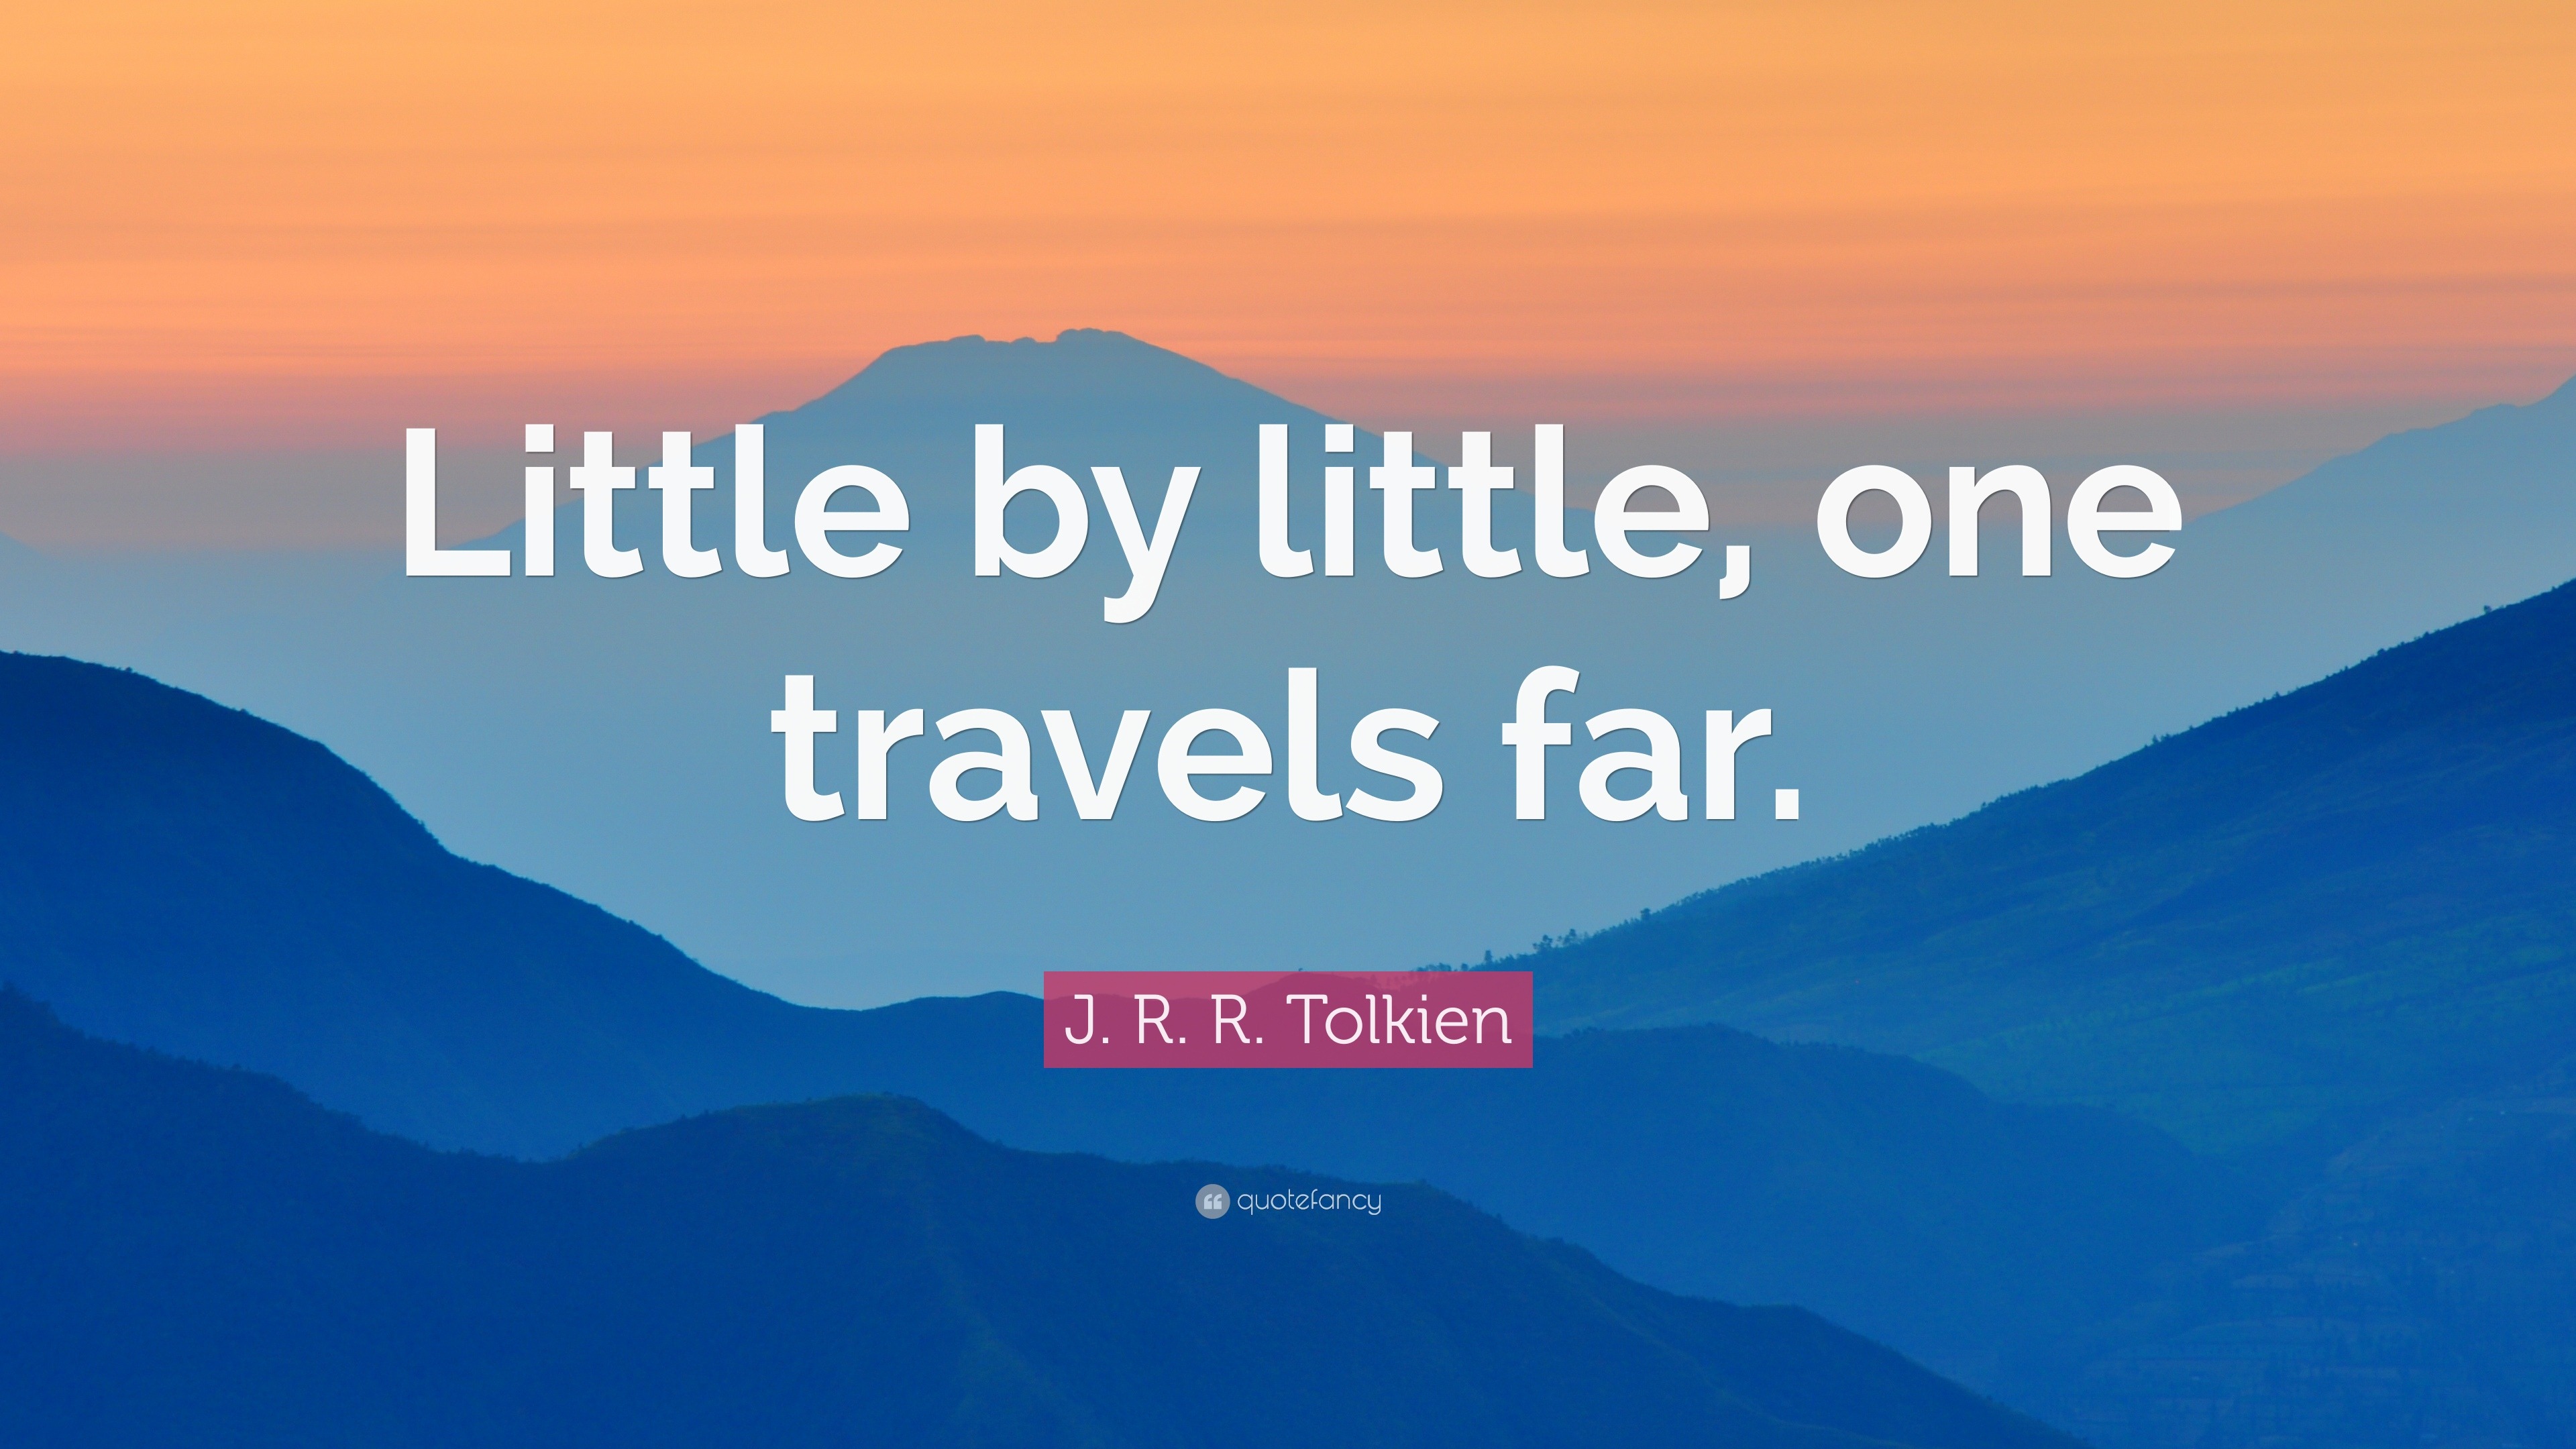 J. R. R. Tolkien Quote: “Little by little, one travels far.”